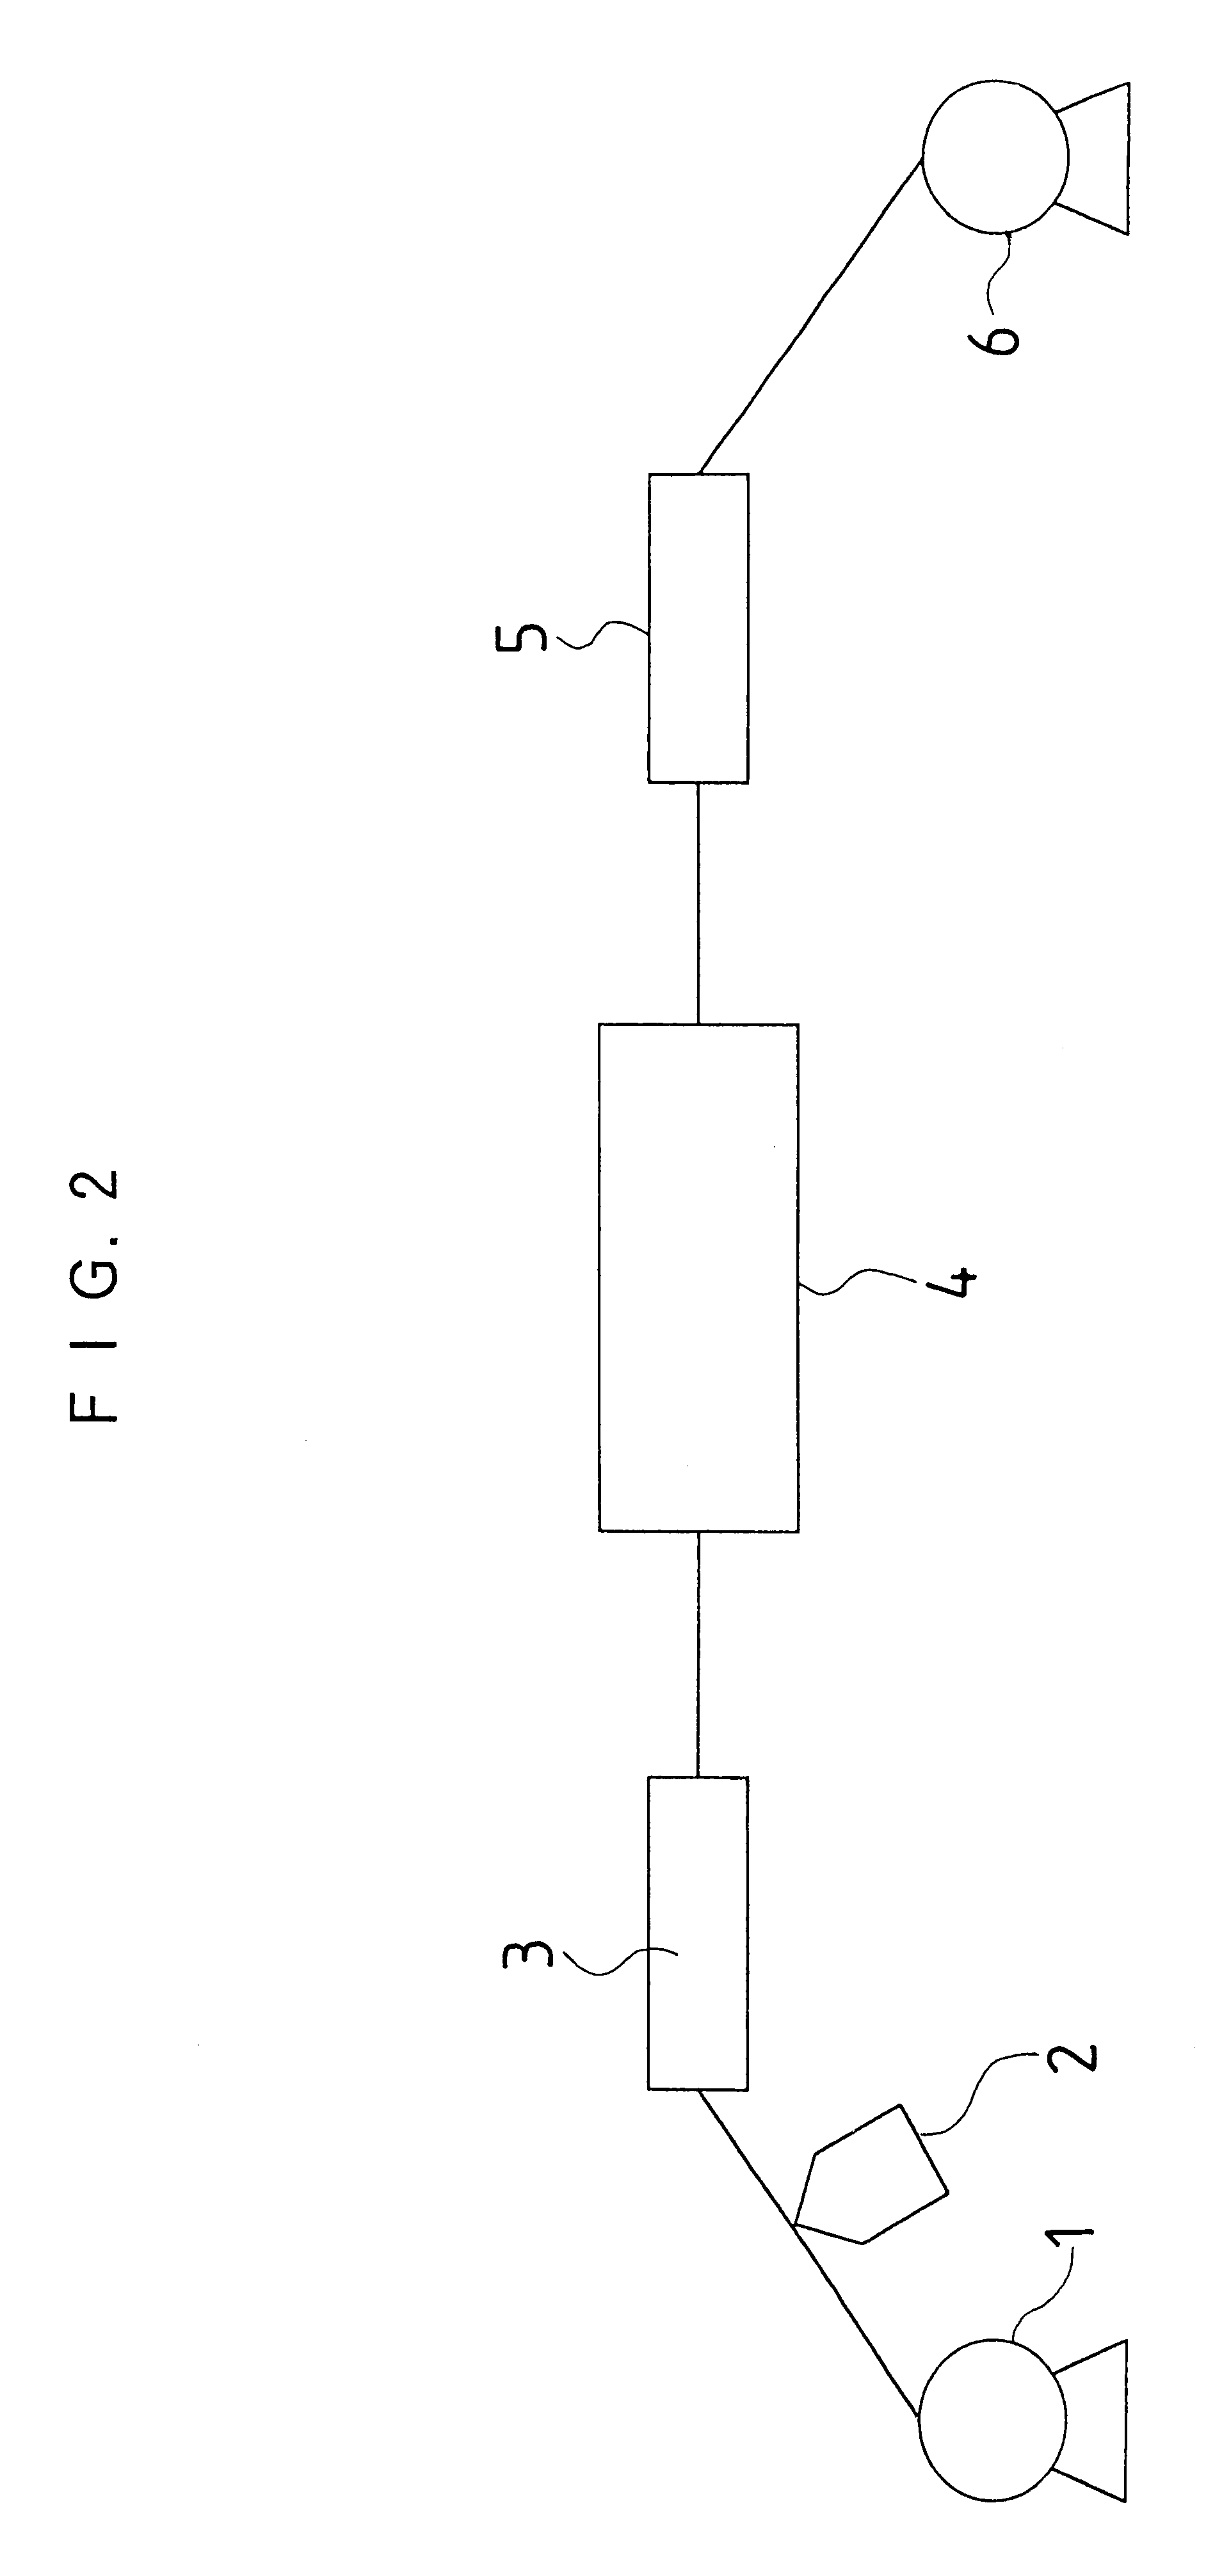 Web particle removal method and apparatus